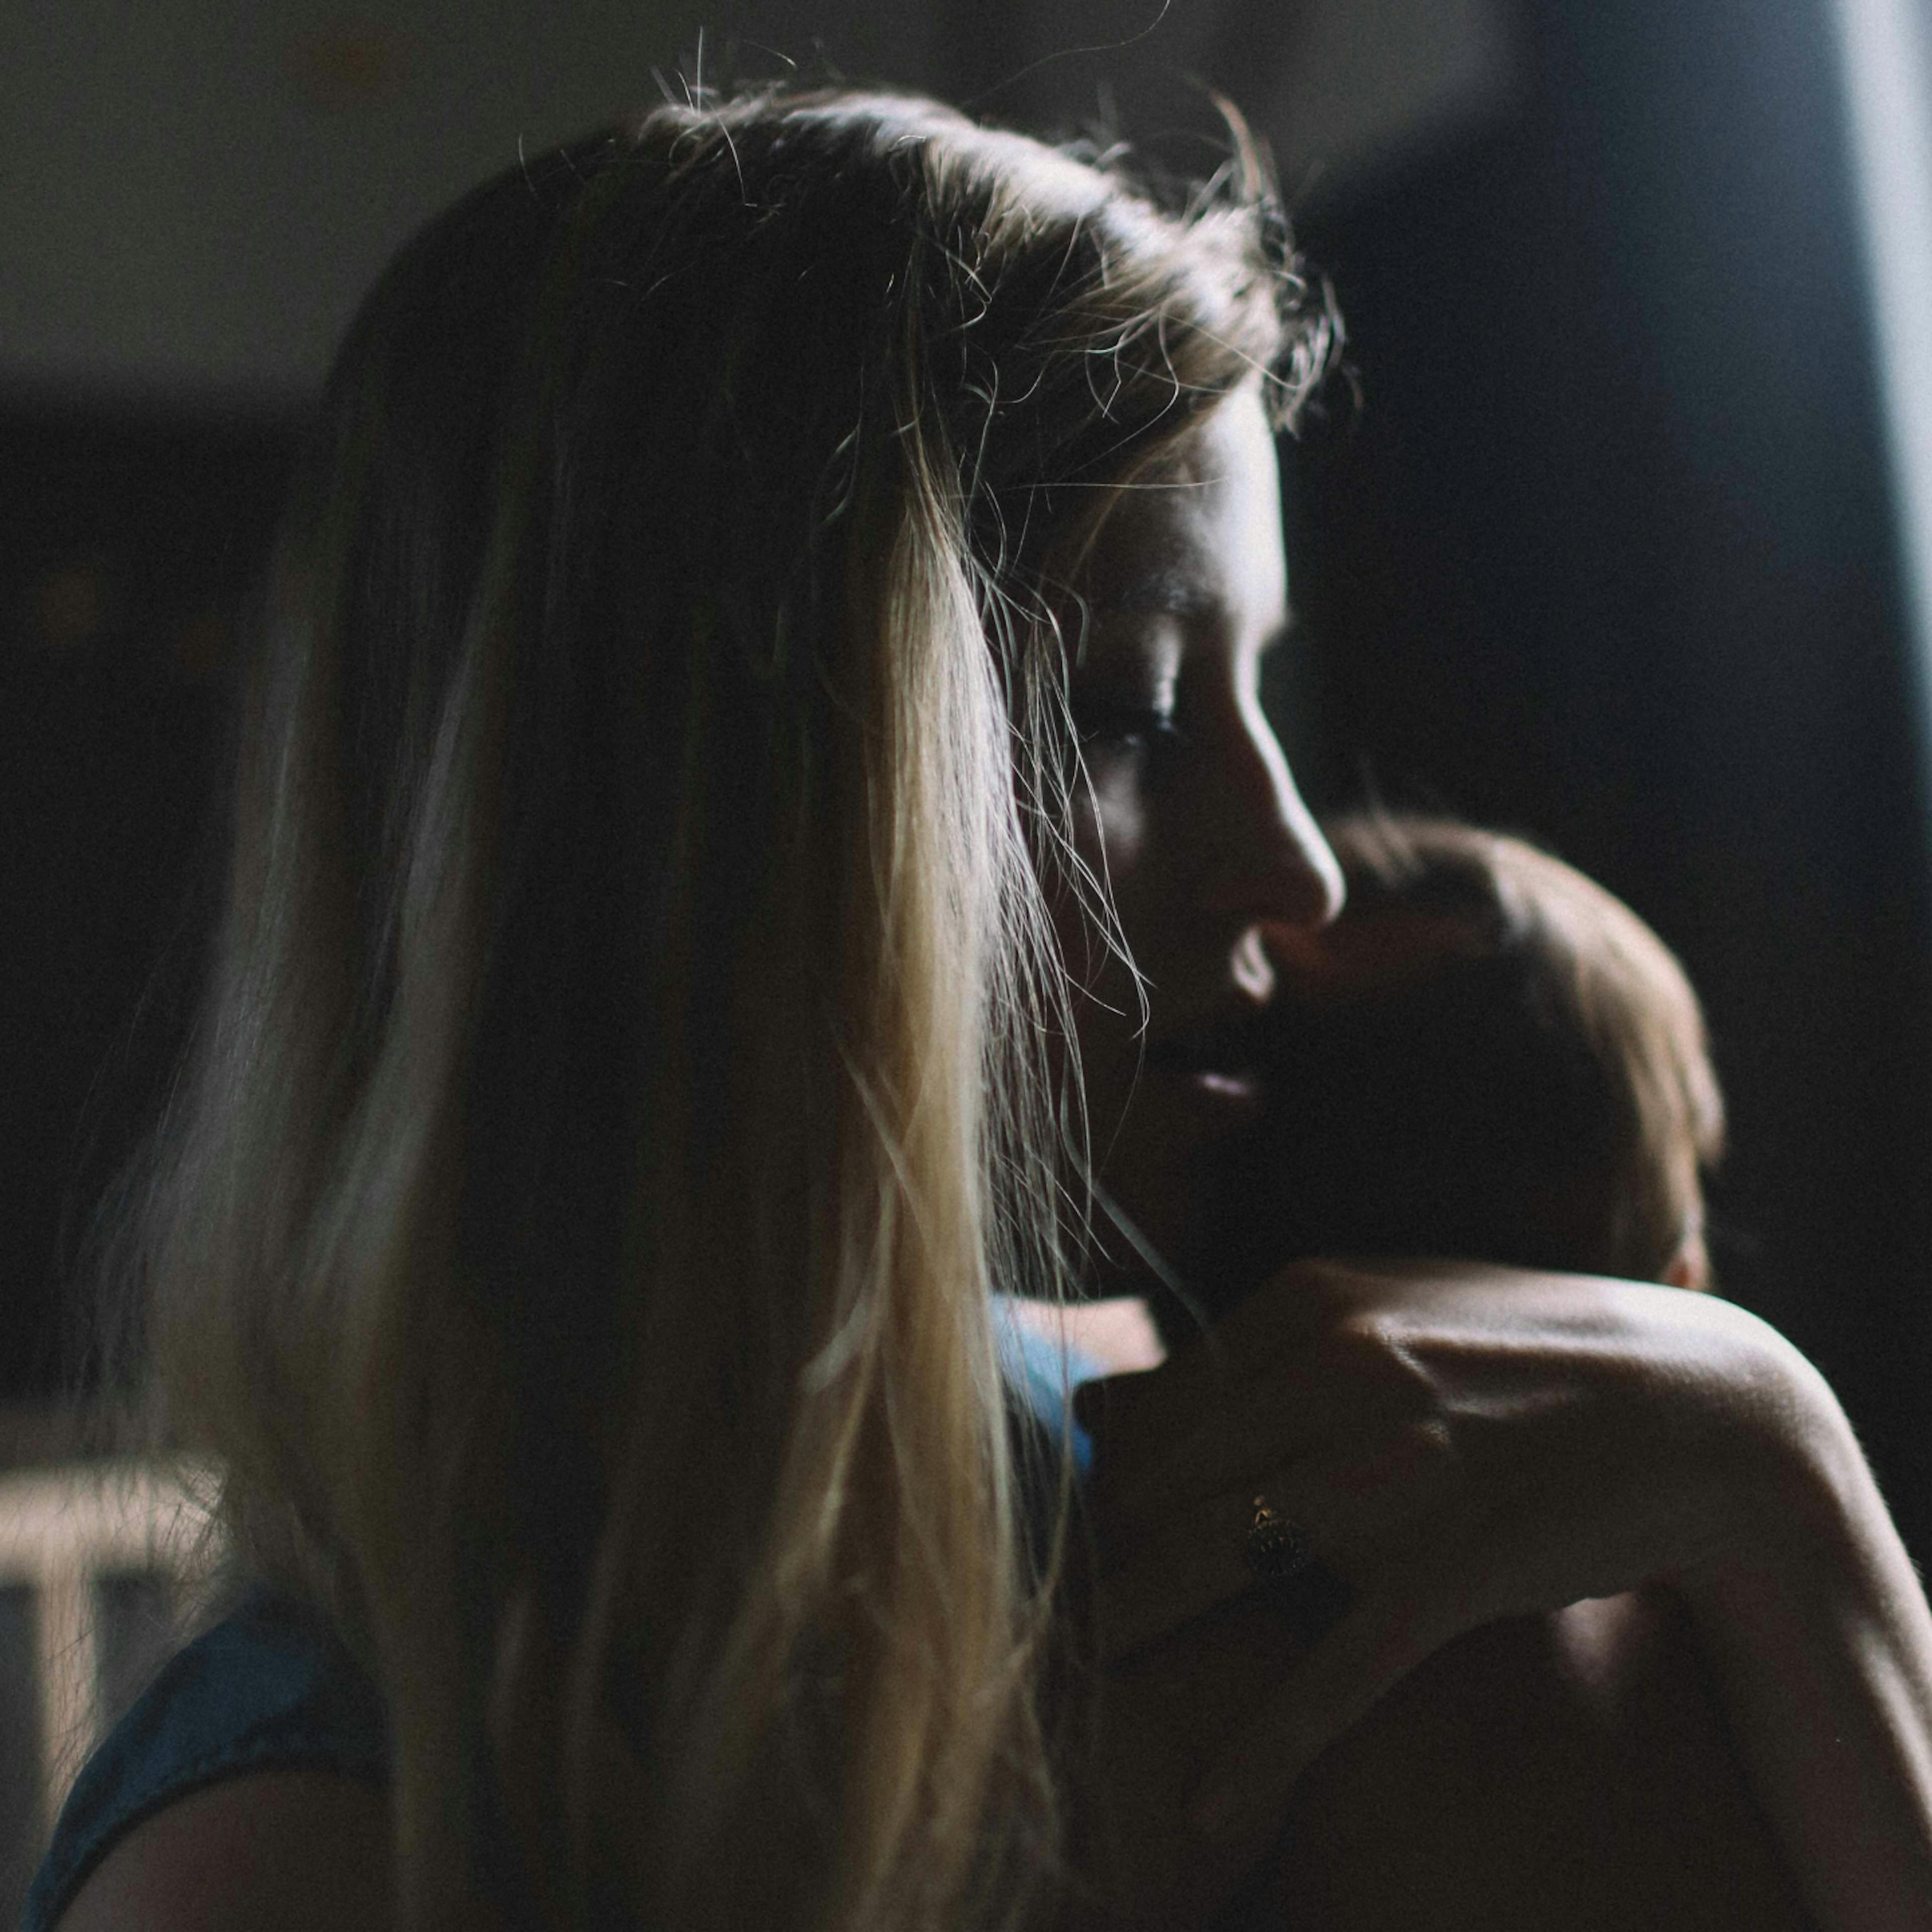 I Suffered From Postpartum Depression and No One Noticed